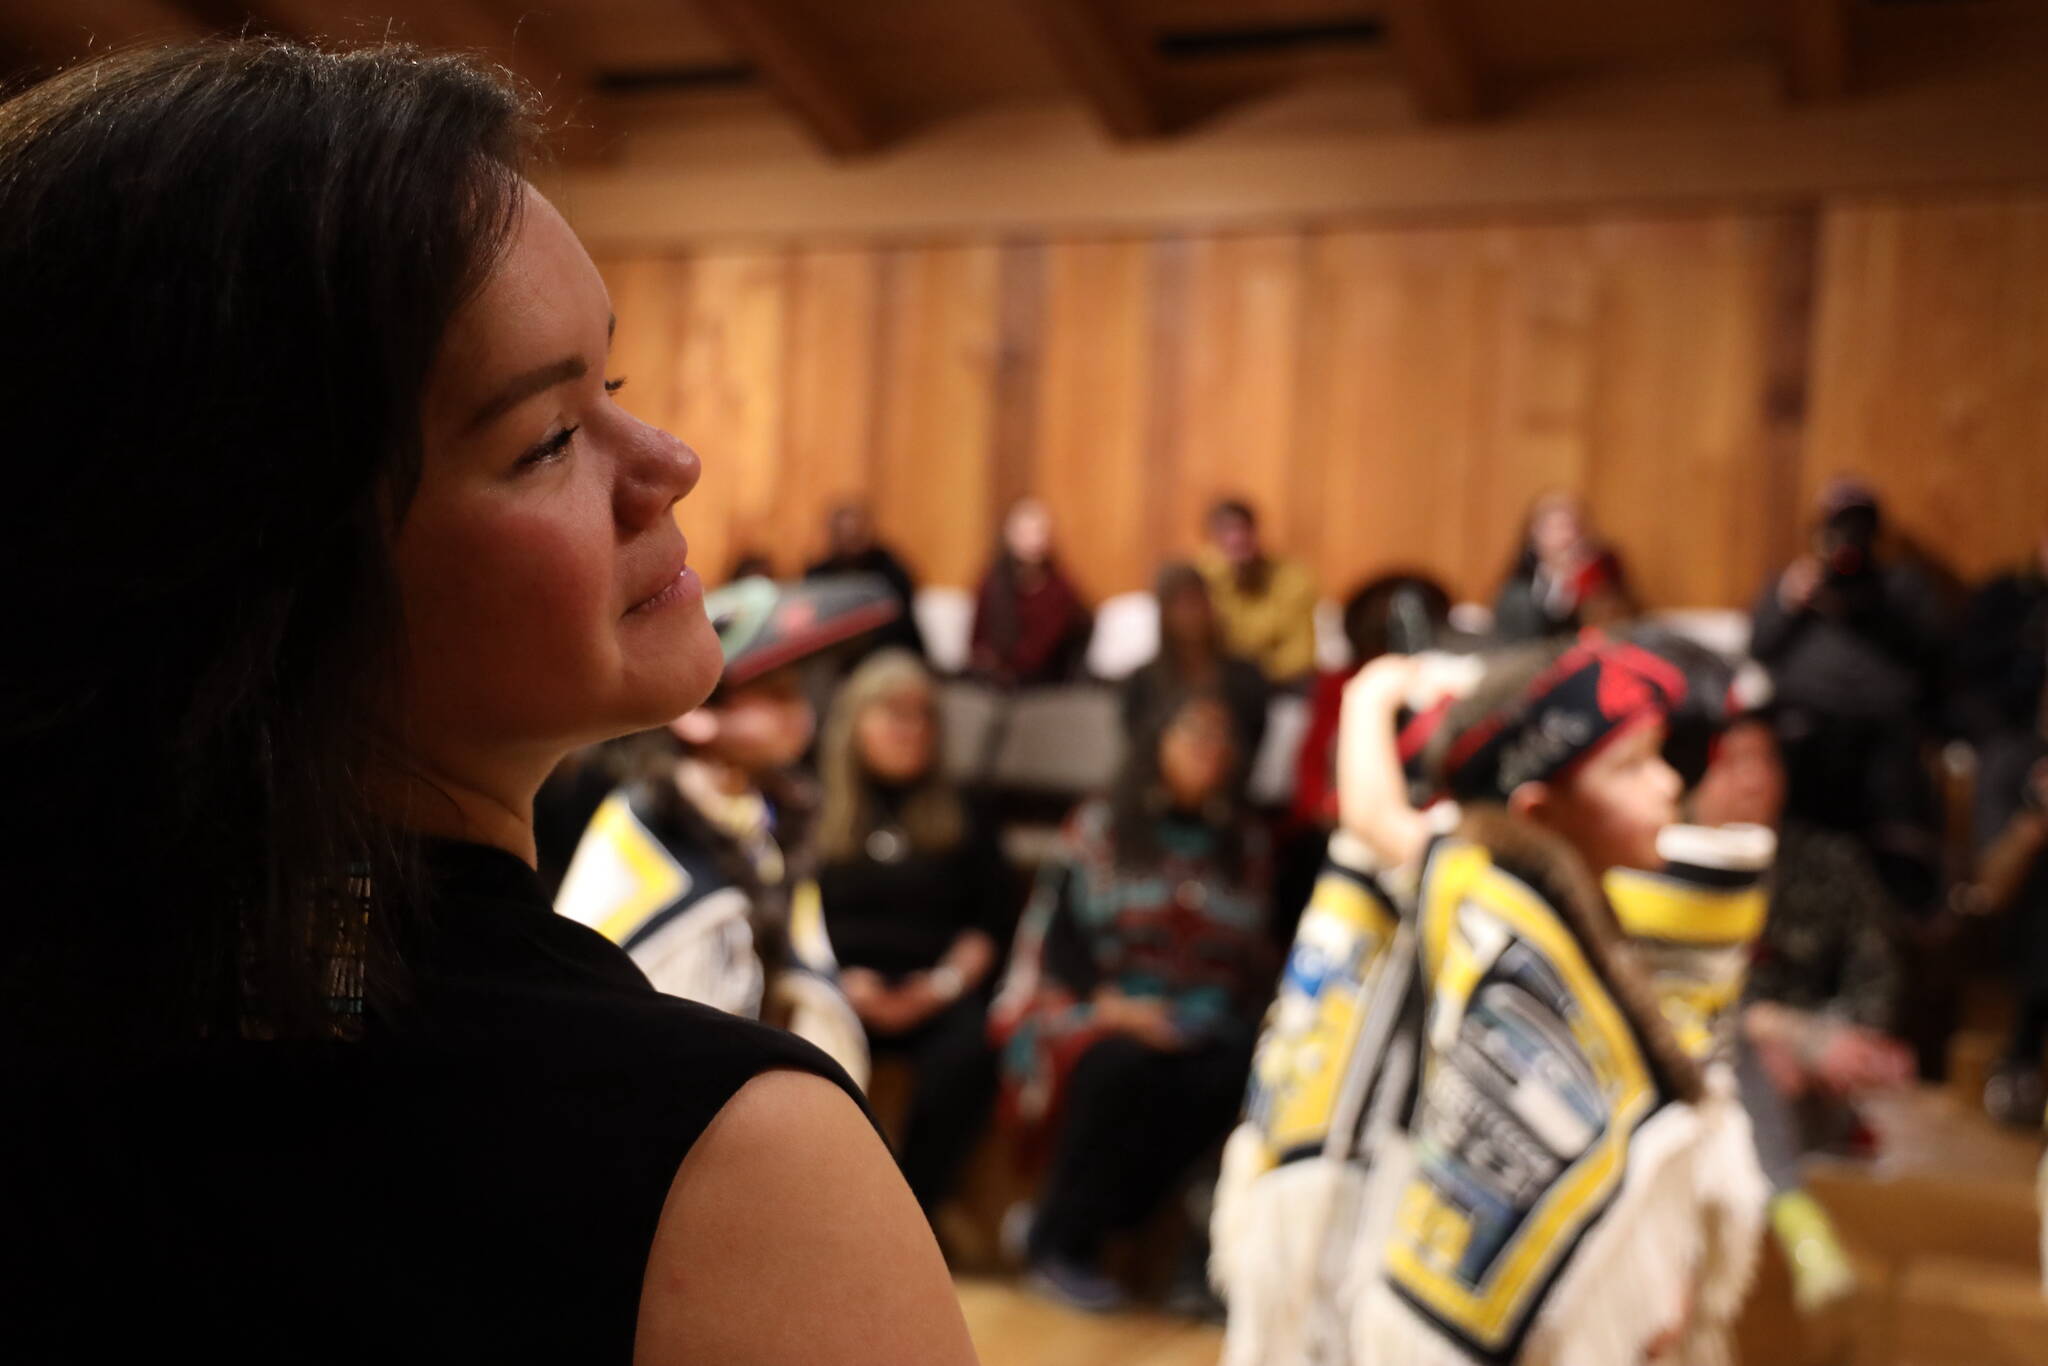 Lily Wooshkindein Da.áat Hope, a multiple-medium Juneau-based artist who taught the craft of Chilkat weaving to dozens of student weavers over the past two years, smiles while watching students from the Tlingit Culture Language and Literacy program at Harborview Elementary School perform a dancing-of-the-robes ceremony Wednesday afternoon. (Clarise Larson / Juneau Empire)